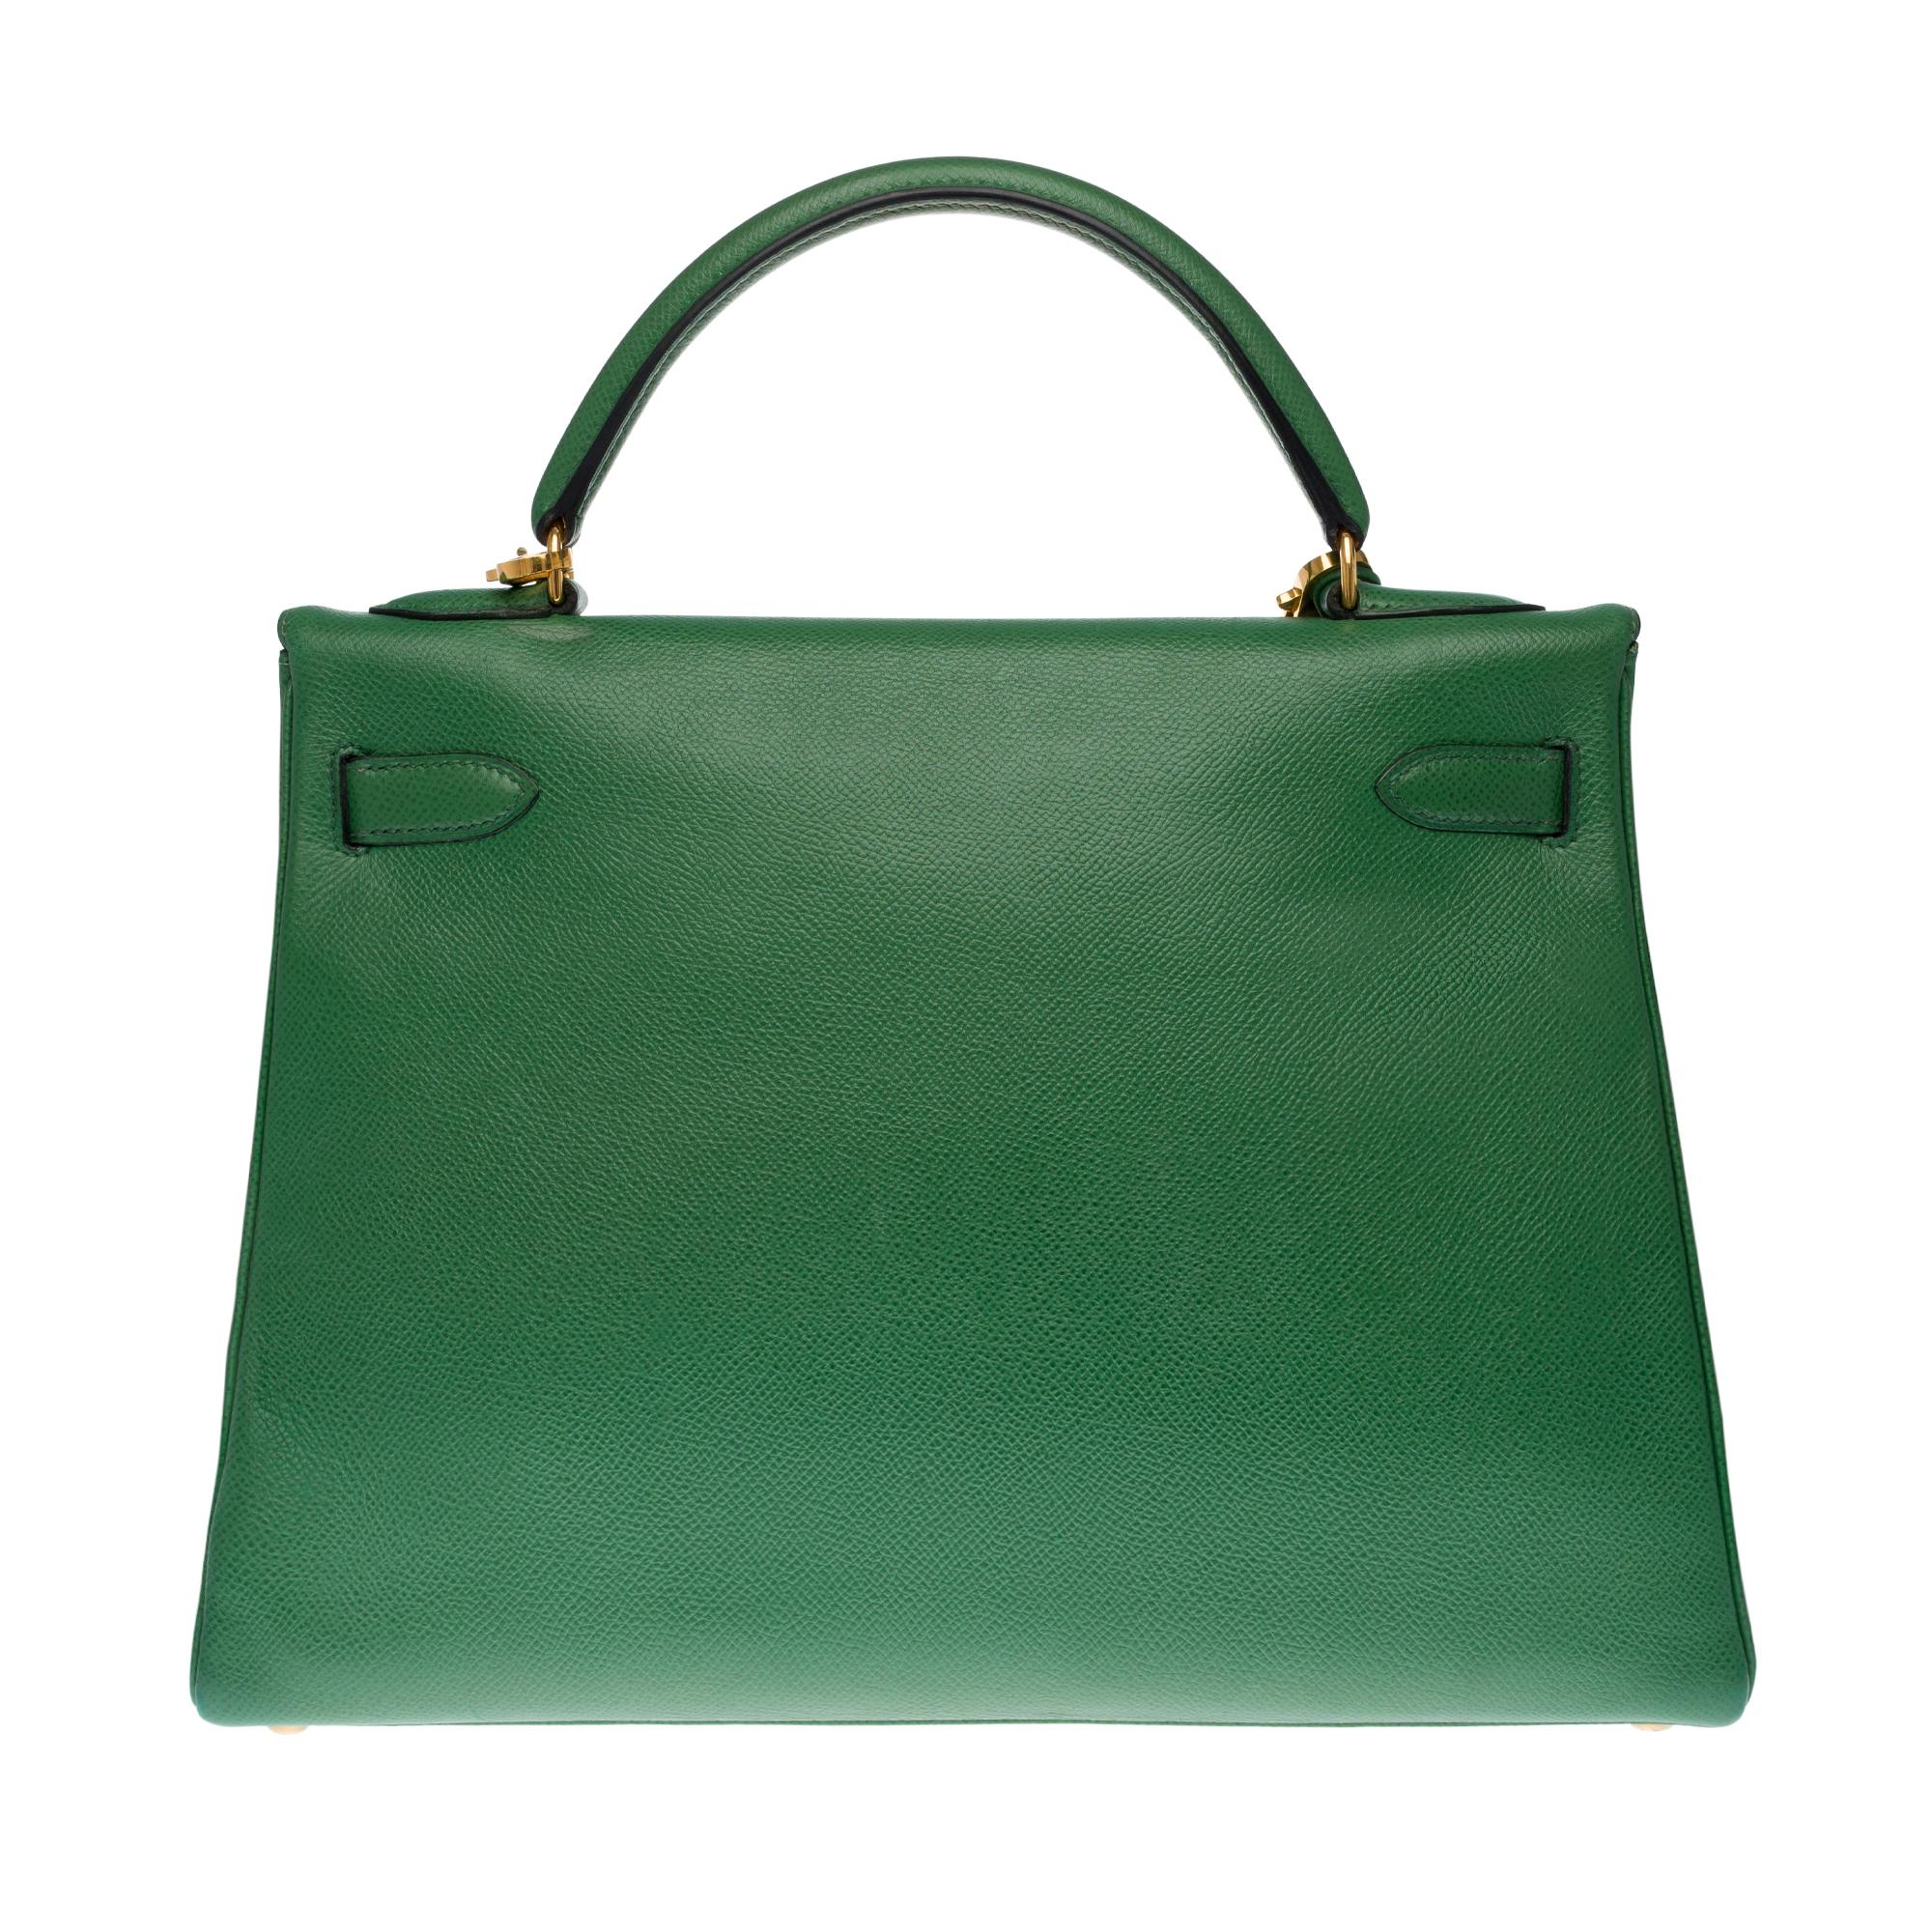 Superb & Rare handbag Hermes Kelly turned 32 cm Courchevel leather green color, gold plated metal hardware, simple handle Courchevel leather green , a removable shoulder strap handle in Courchevel leather green allowing a hand or shoulder